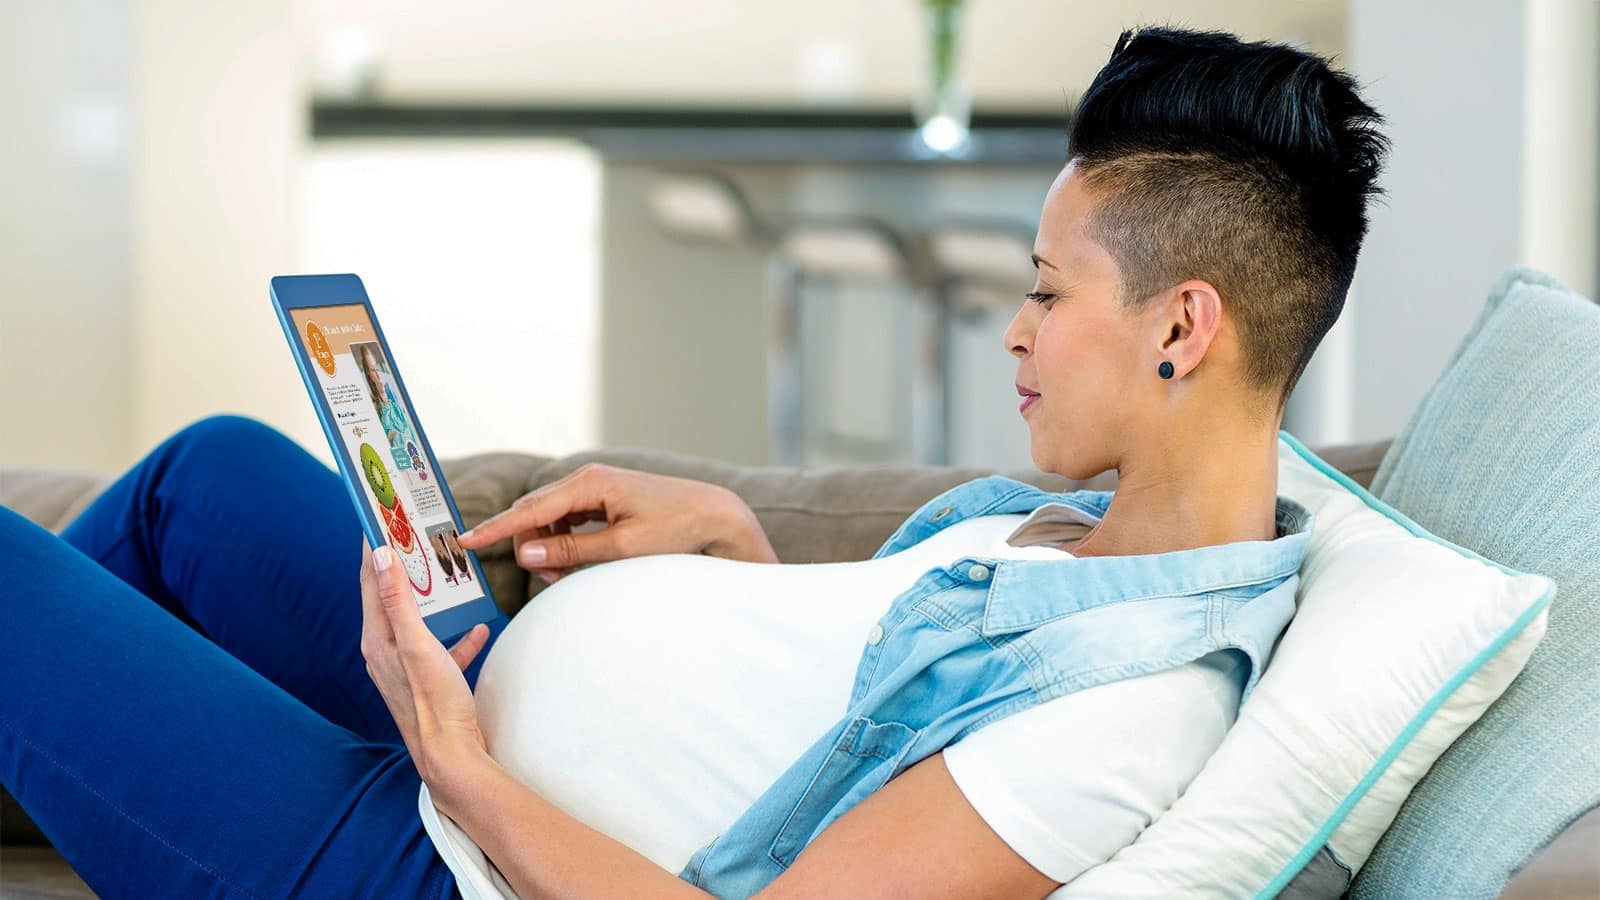 Expectant parent relaxing on the sofa while reading an ebook on a tablet.